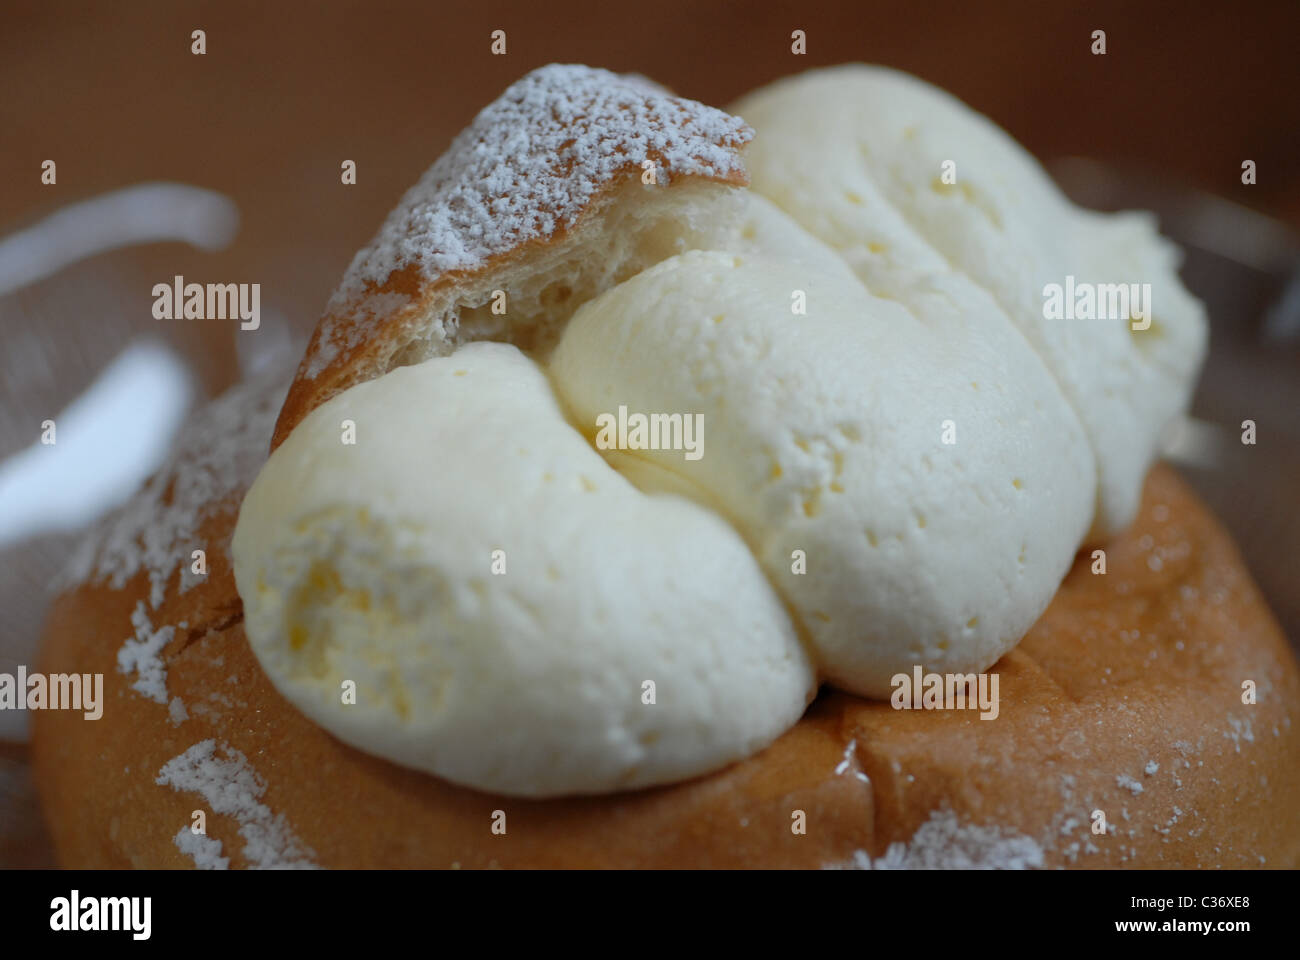 Semla, Swedish Easter bun with whipped cream and almond paste. Stock Photo